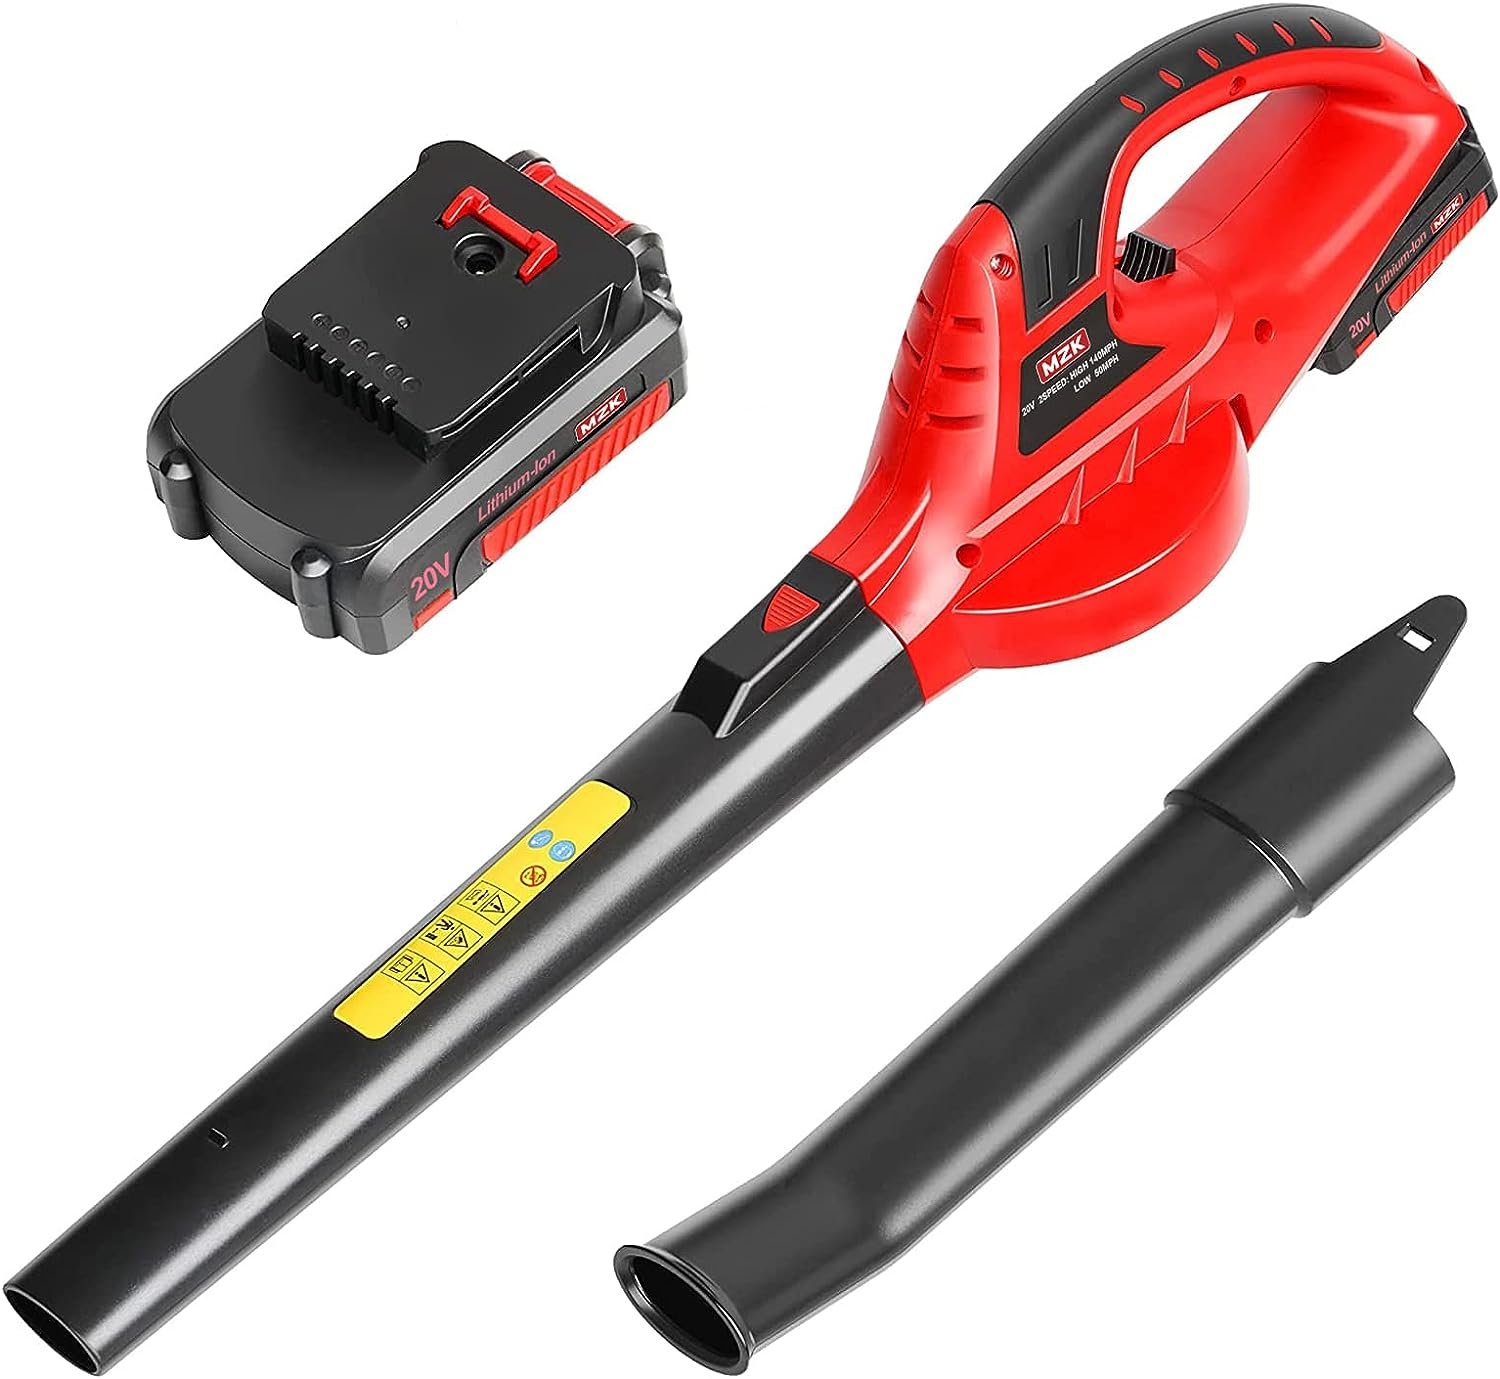 MZK Cordless Leaf Blower Review